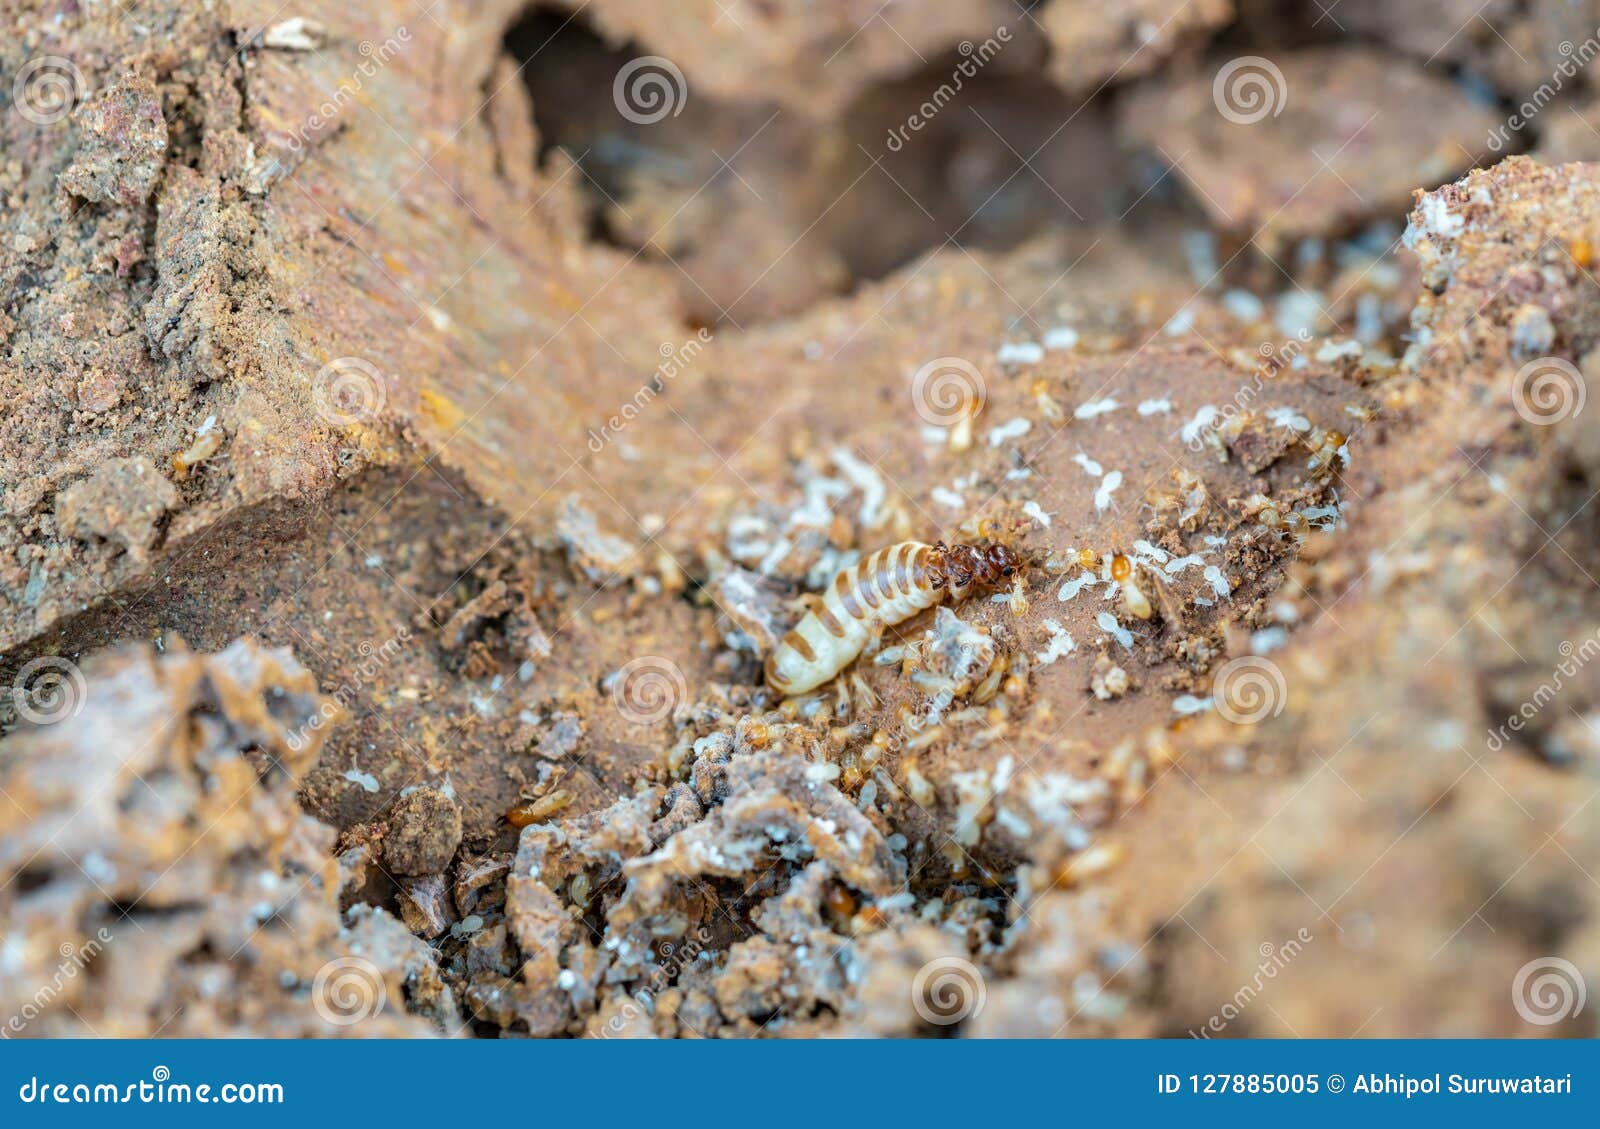 acro shot of the queen termite and termites in a hole. termite queens have the longest lifespan of any insect in the world, s